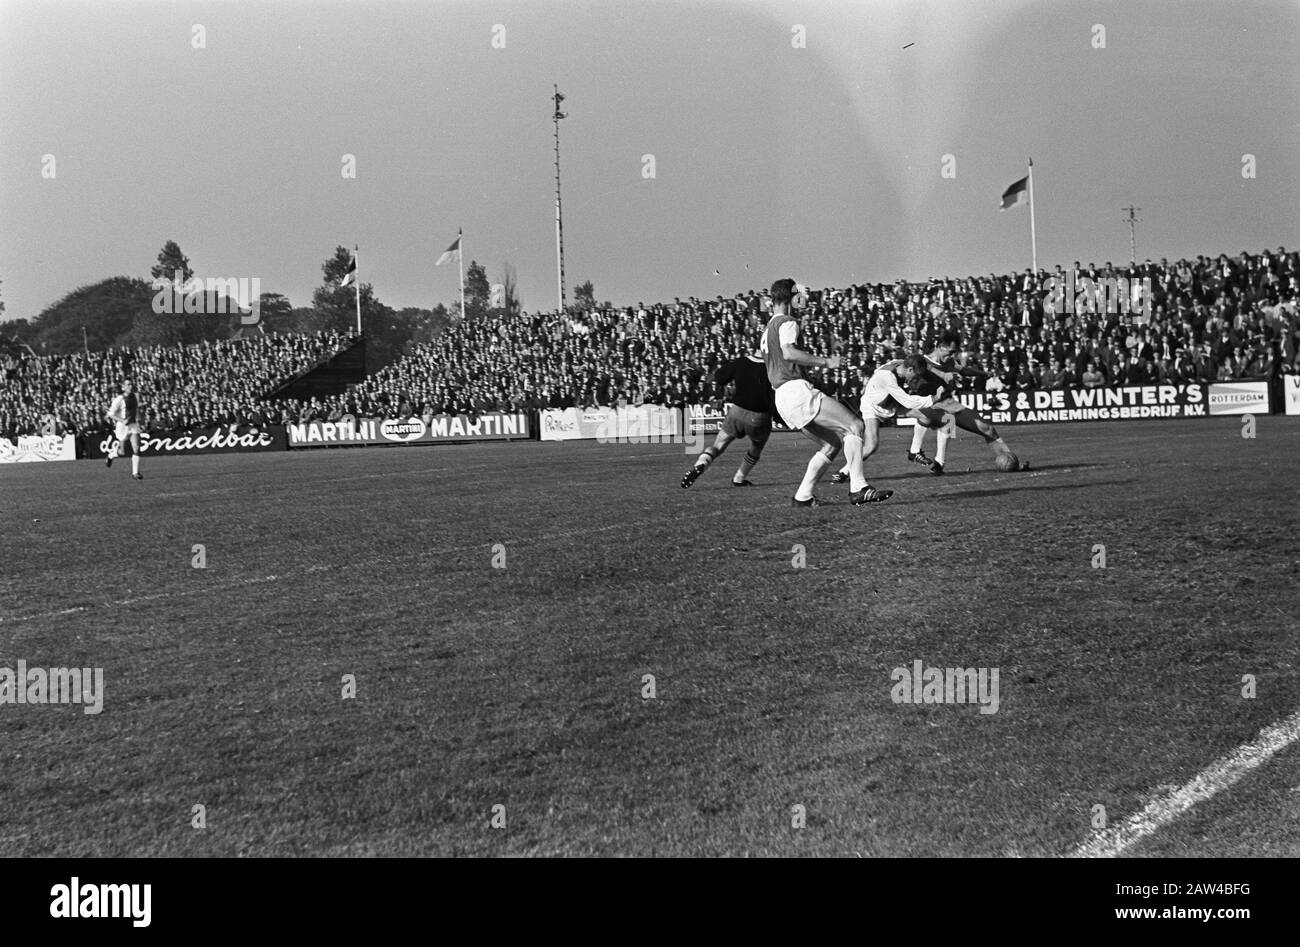 RCH against Ajax 2-0 cup football game moments Date: October 4, 1964 Location: Heemstede Keywords: sport, football Institution Name: AJAX Stock Photo